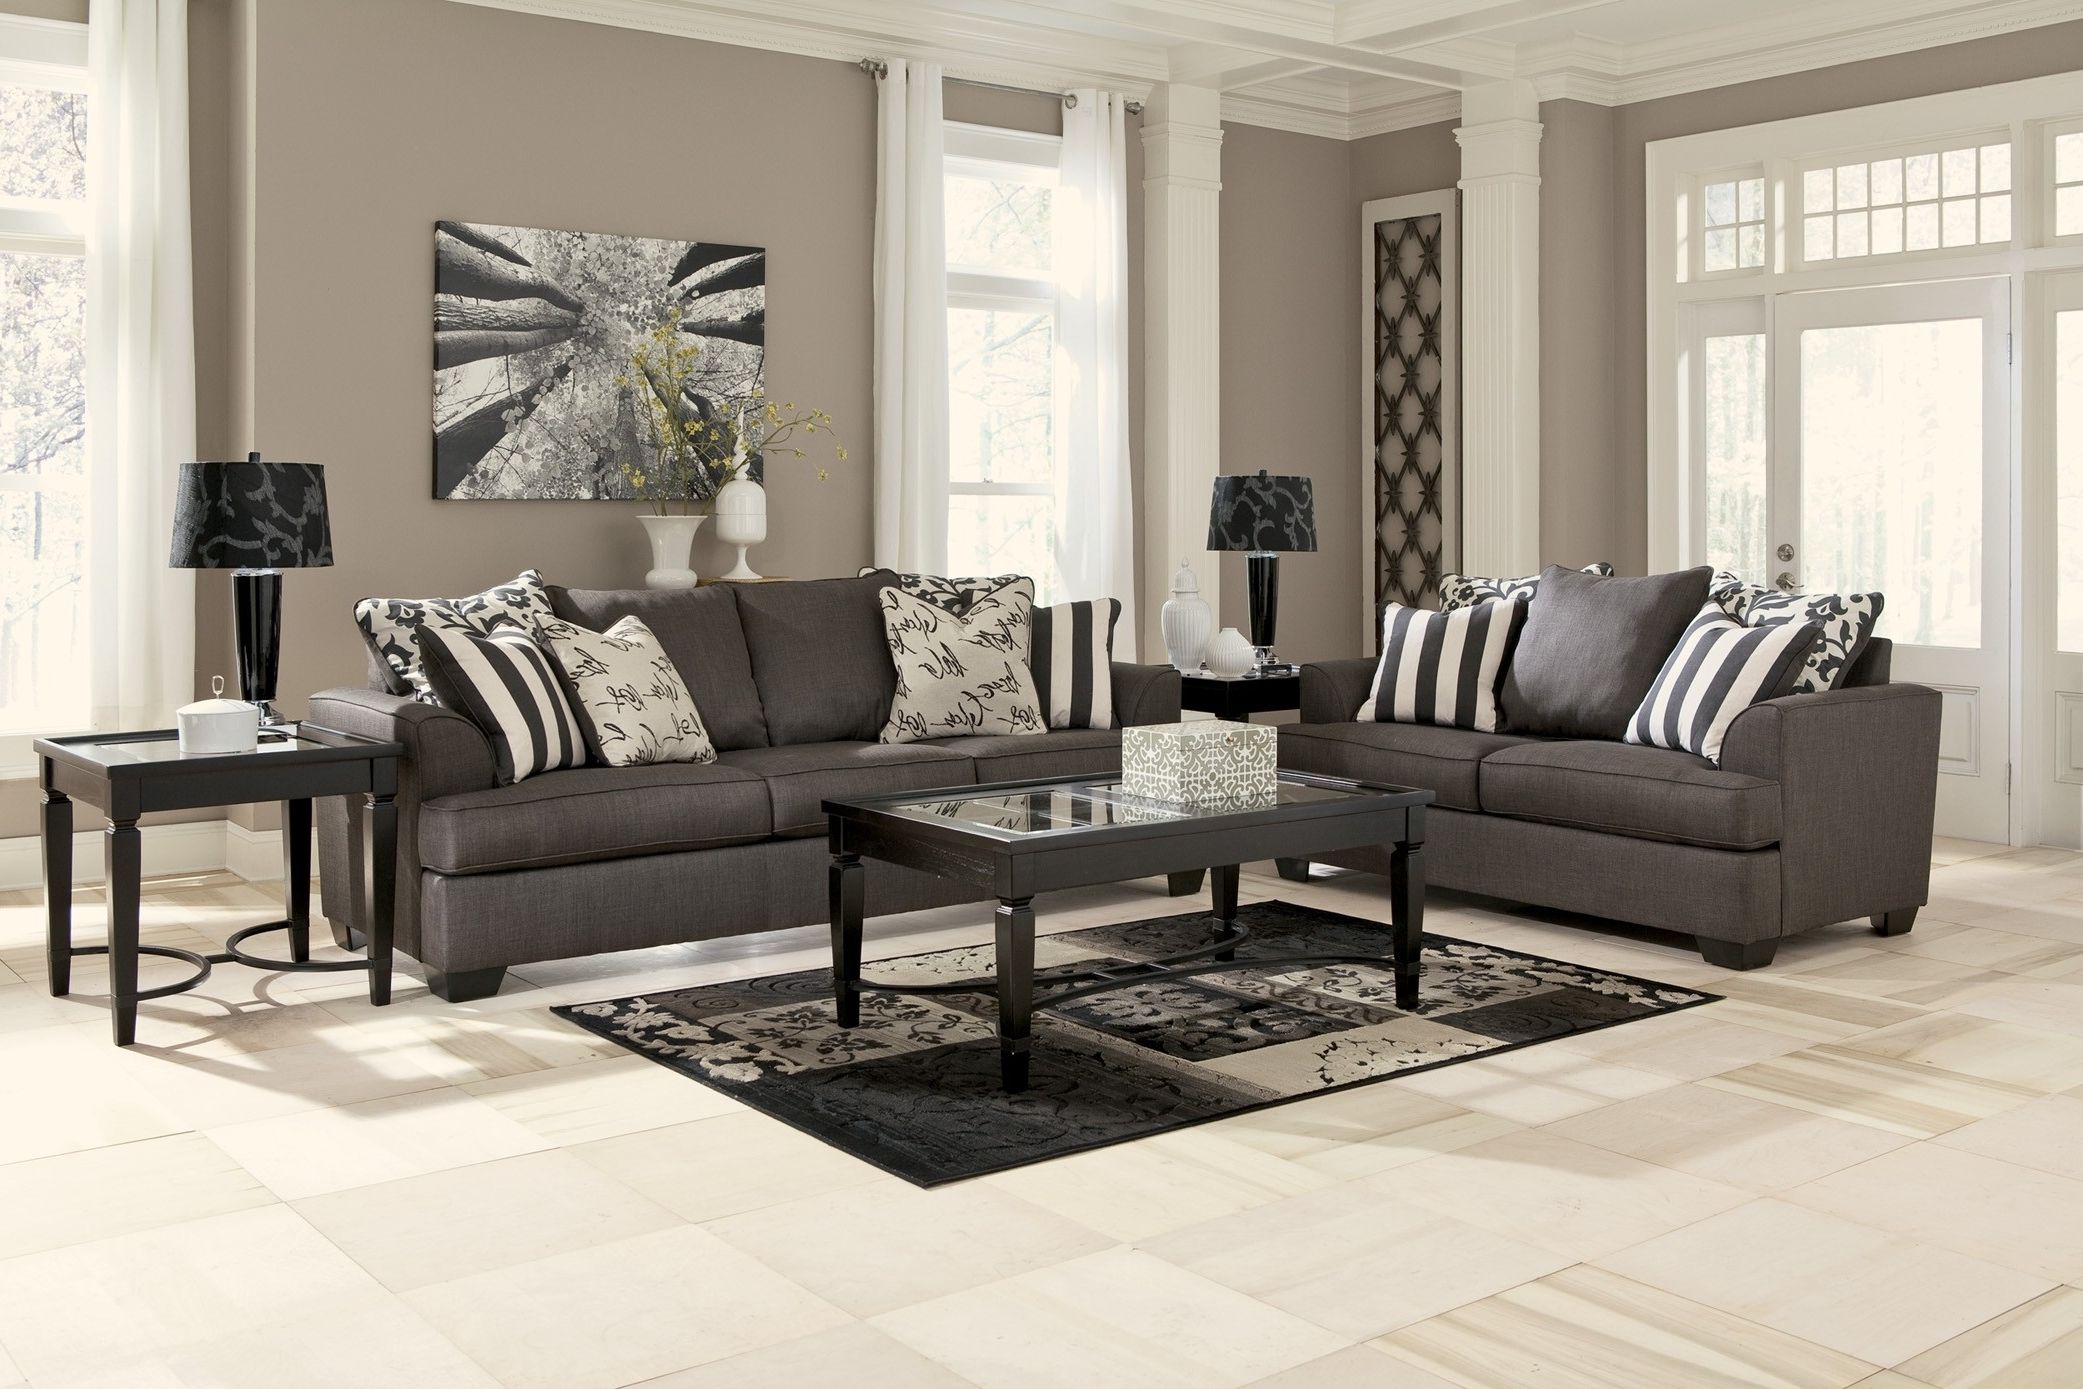 Charcoal Grey Sofas For Recent Couch Amazing Charcoal Grey Couch Modern Corner Couch Gray 